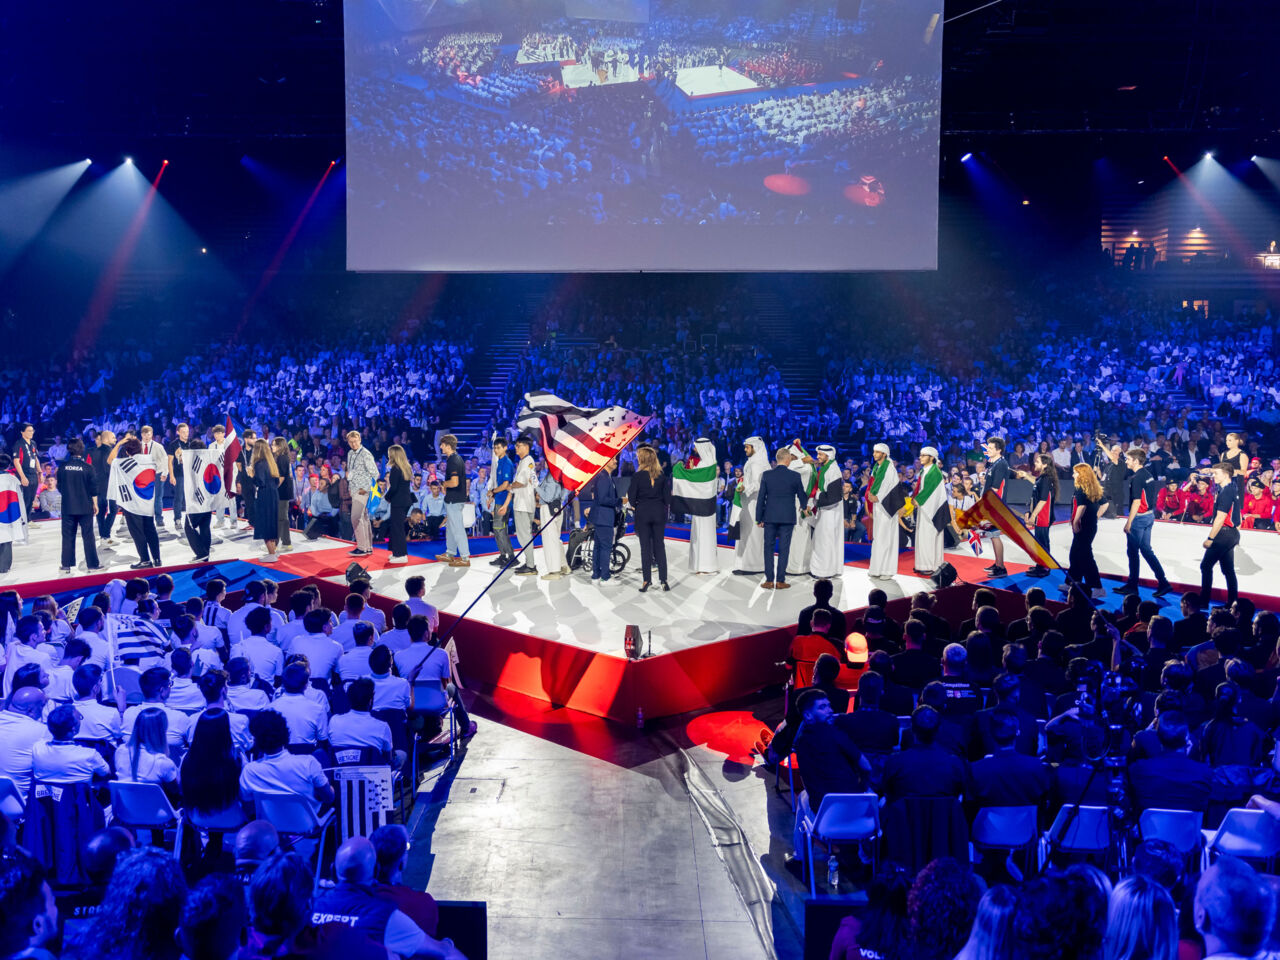 During the Closing Ceremony on the evening of 16 September, the international Competitors were called onstage to receive participation medals.
